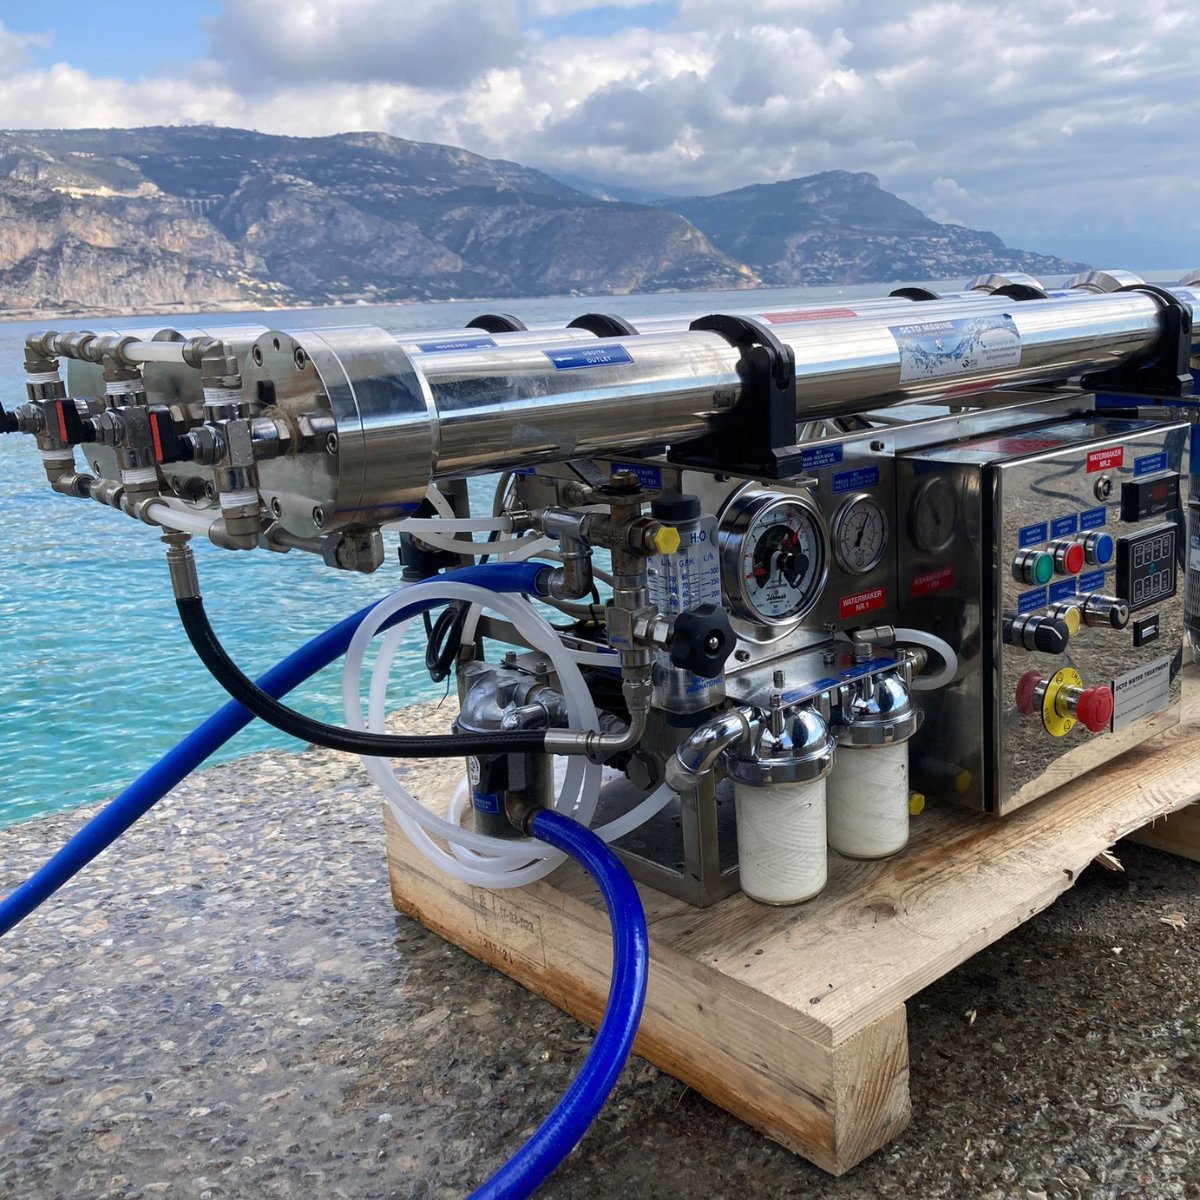 The shipyard of Saint Jean Cap Ferrat is using our desalination equipment.

If you want to find out how we can help you with your specific water provision needs you can check out the whole list of services on our site: bit.ly/3IMstpK

#watertreatment #safewater